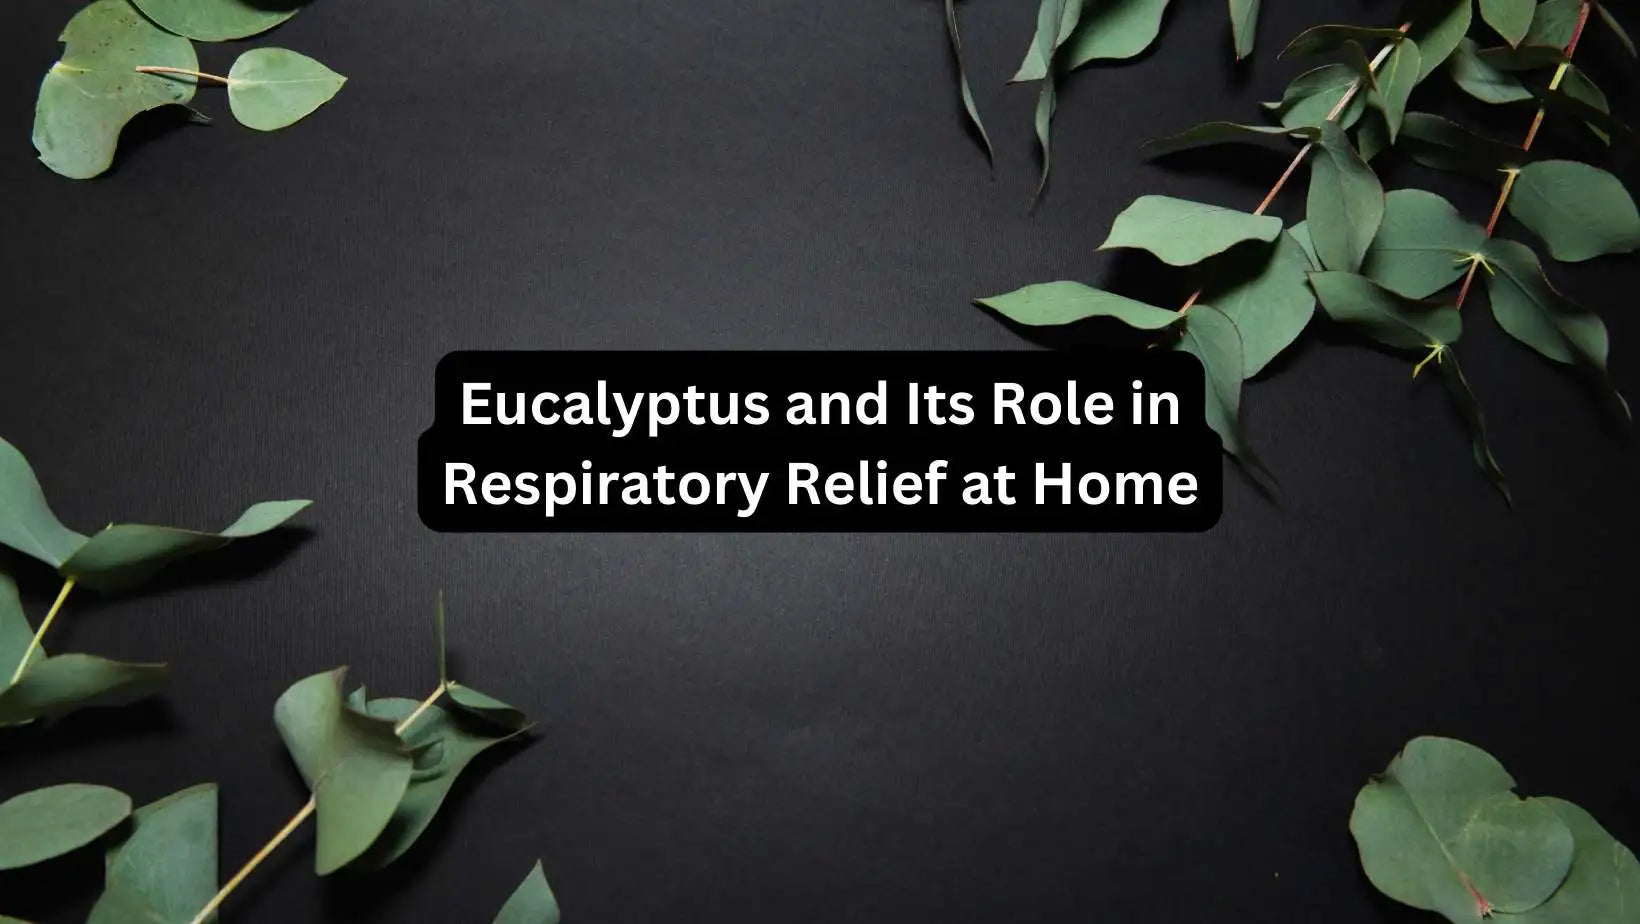 Eucalyptus and Its Role in Respiratory Relief at Home